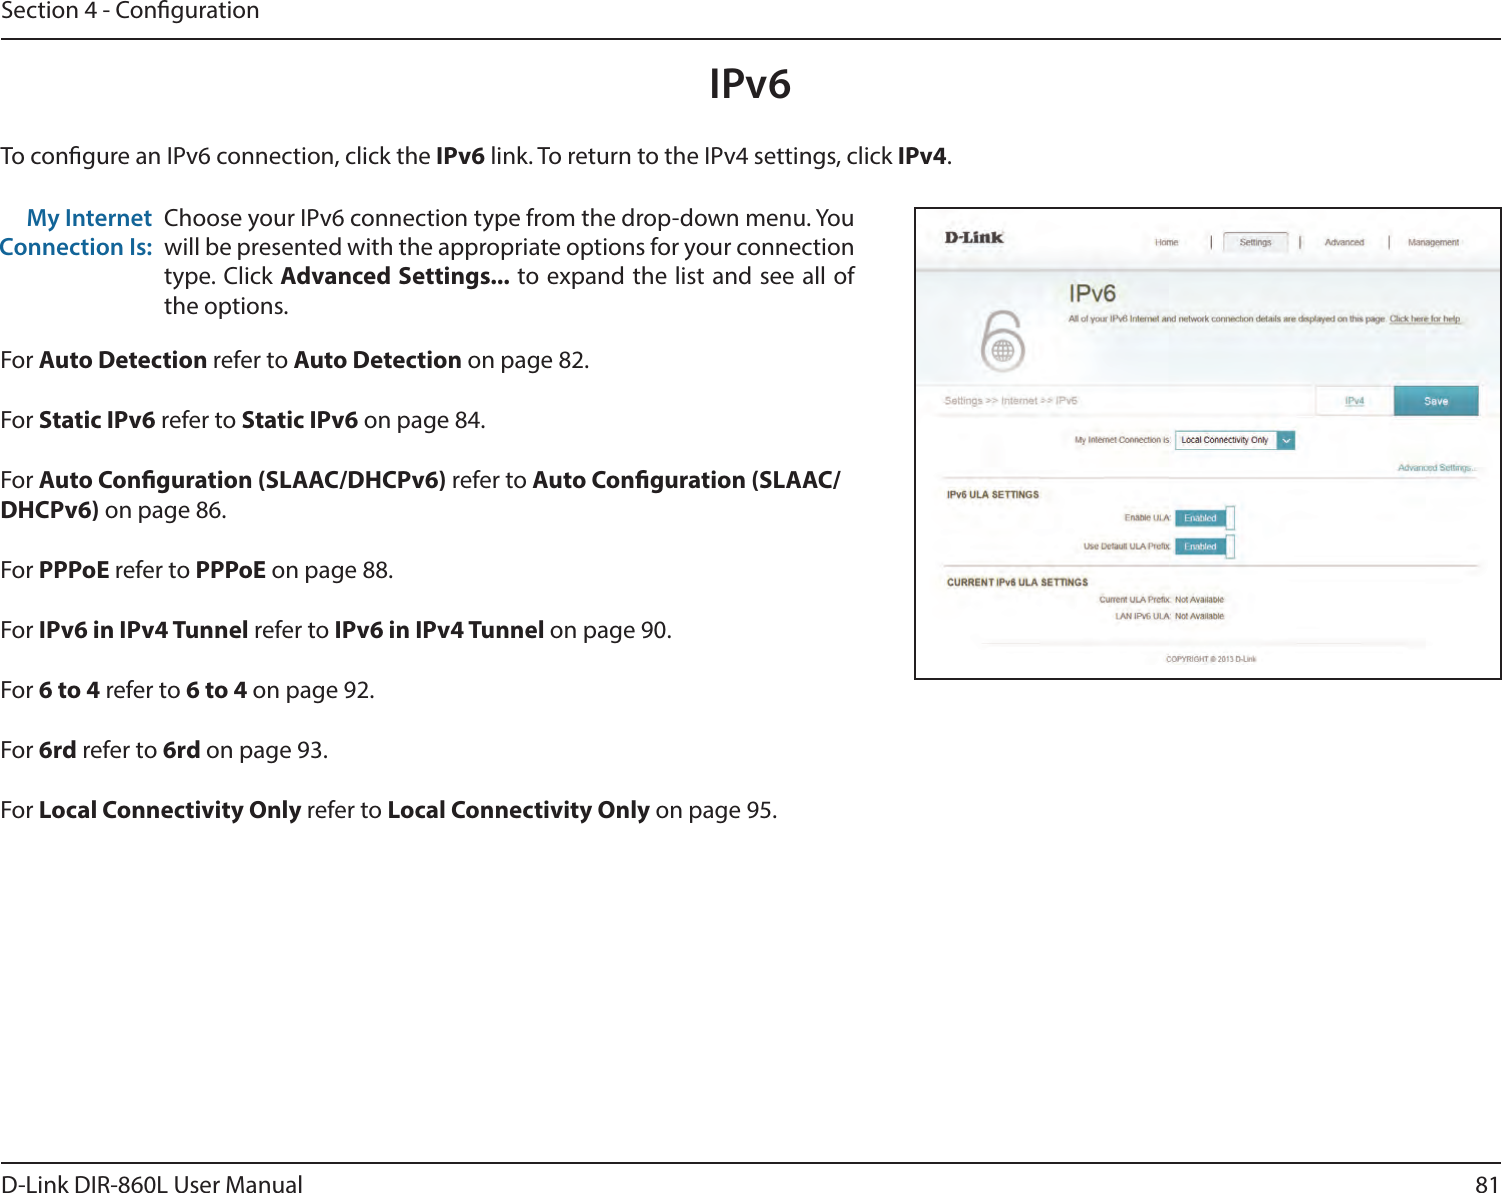 81D-Link DIR-860L User ManualSection 4 - CongurationIPv6To congure an IPv6 connection, click the IPv6 link. To return to the IPv4 settings, click IPv4.Choose your IPv6 connection type from the drop-down menu. You will be presented with the appropriate options for your connection type. Click Advanced Settings... to expand the list and see all of the options.My Internet Connection Is:For Auto Detection refer to Auto Detection on page 82.For Static IPv6 refer to Static IPv6 on page 84.For Auto Conguration (SLAAC/DHCPv6) refer to Auto Conguration (SLAAC/DHCPv6) on page 86.For PPPoE refer to PPPoE on page 88.For IPv6 in IPv4 Tunnel refer to IPv6 in IPv4 Tunnel on page 90.For 6 to 4 refer to 6 to 4 on page 92.For 6rd refer to 6rd on page 93.For Local Connectivity Only refer to Local Connectivity Only on page 95.